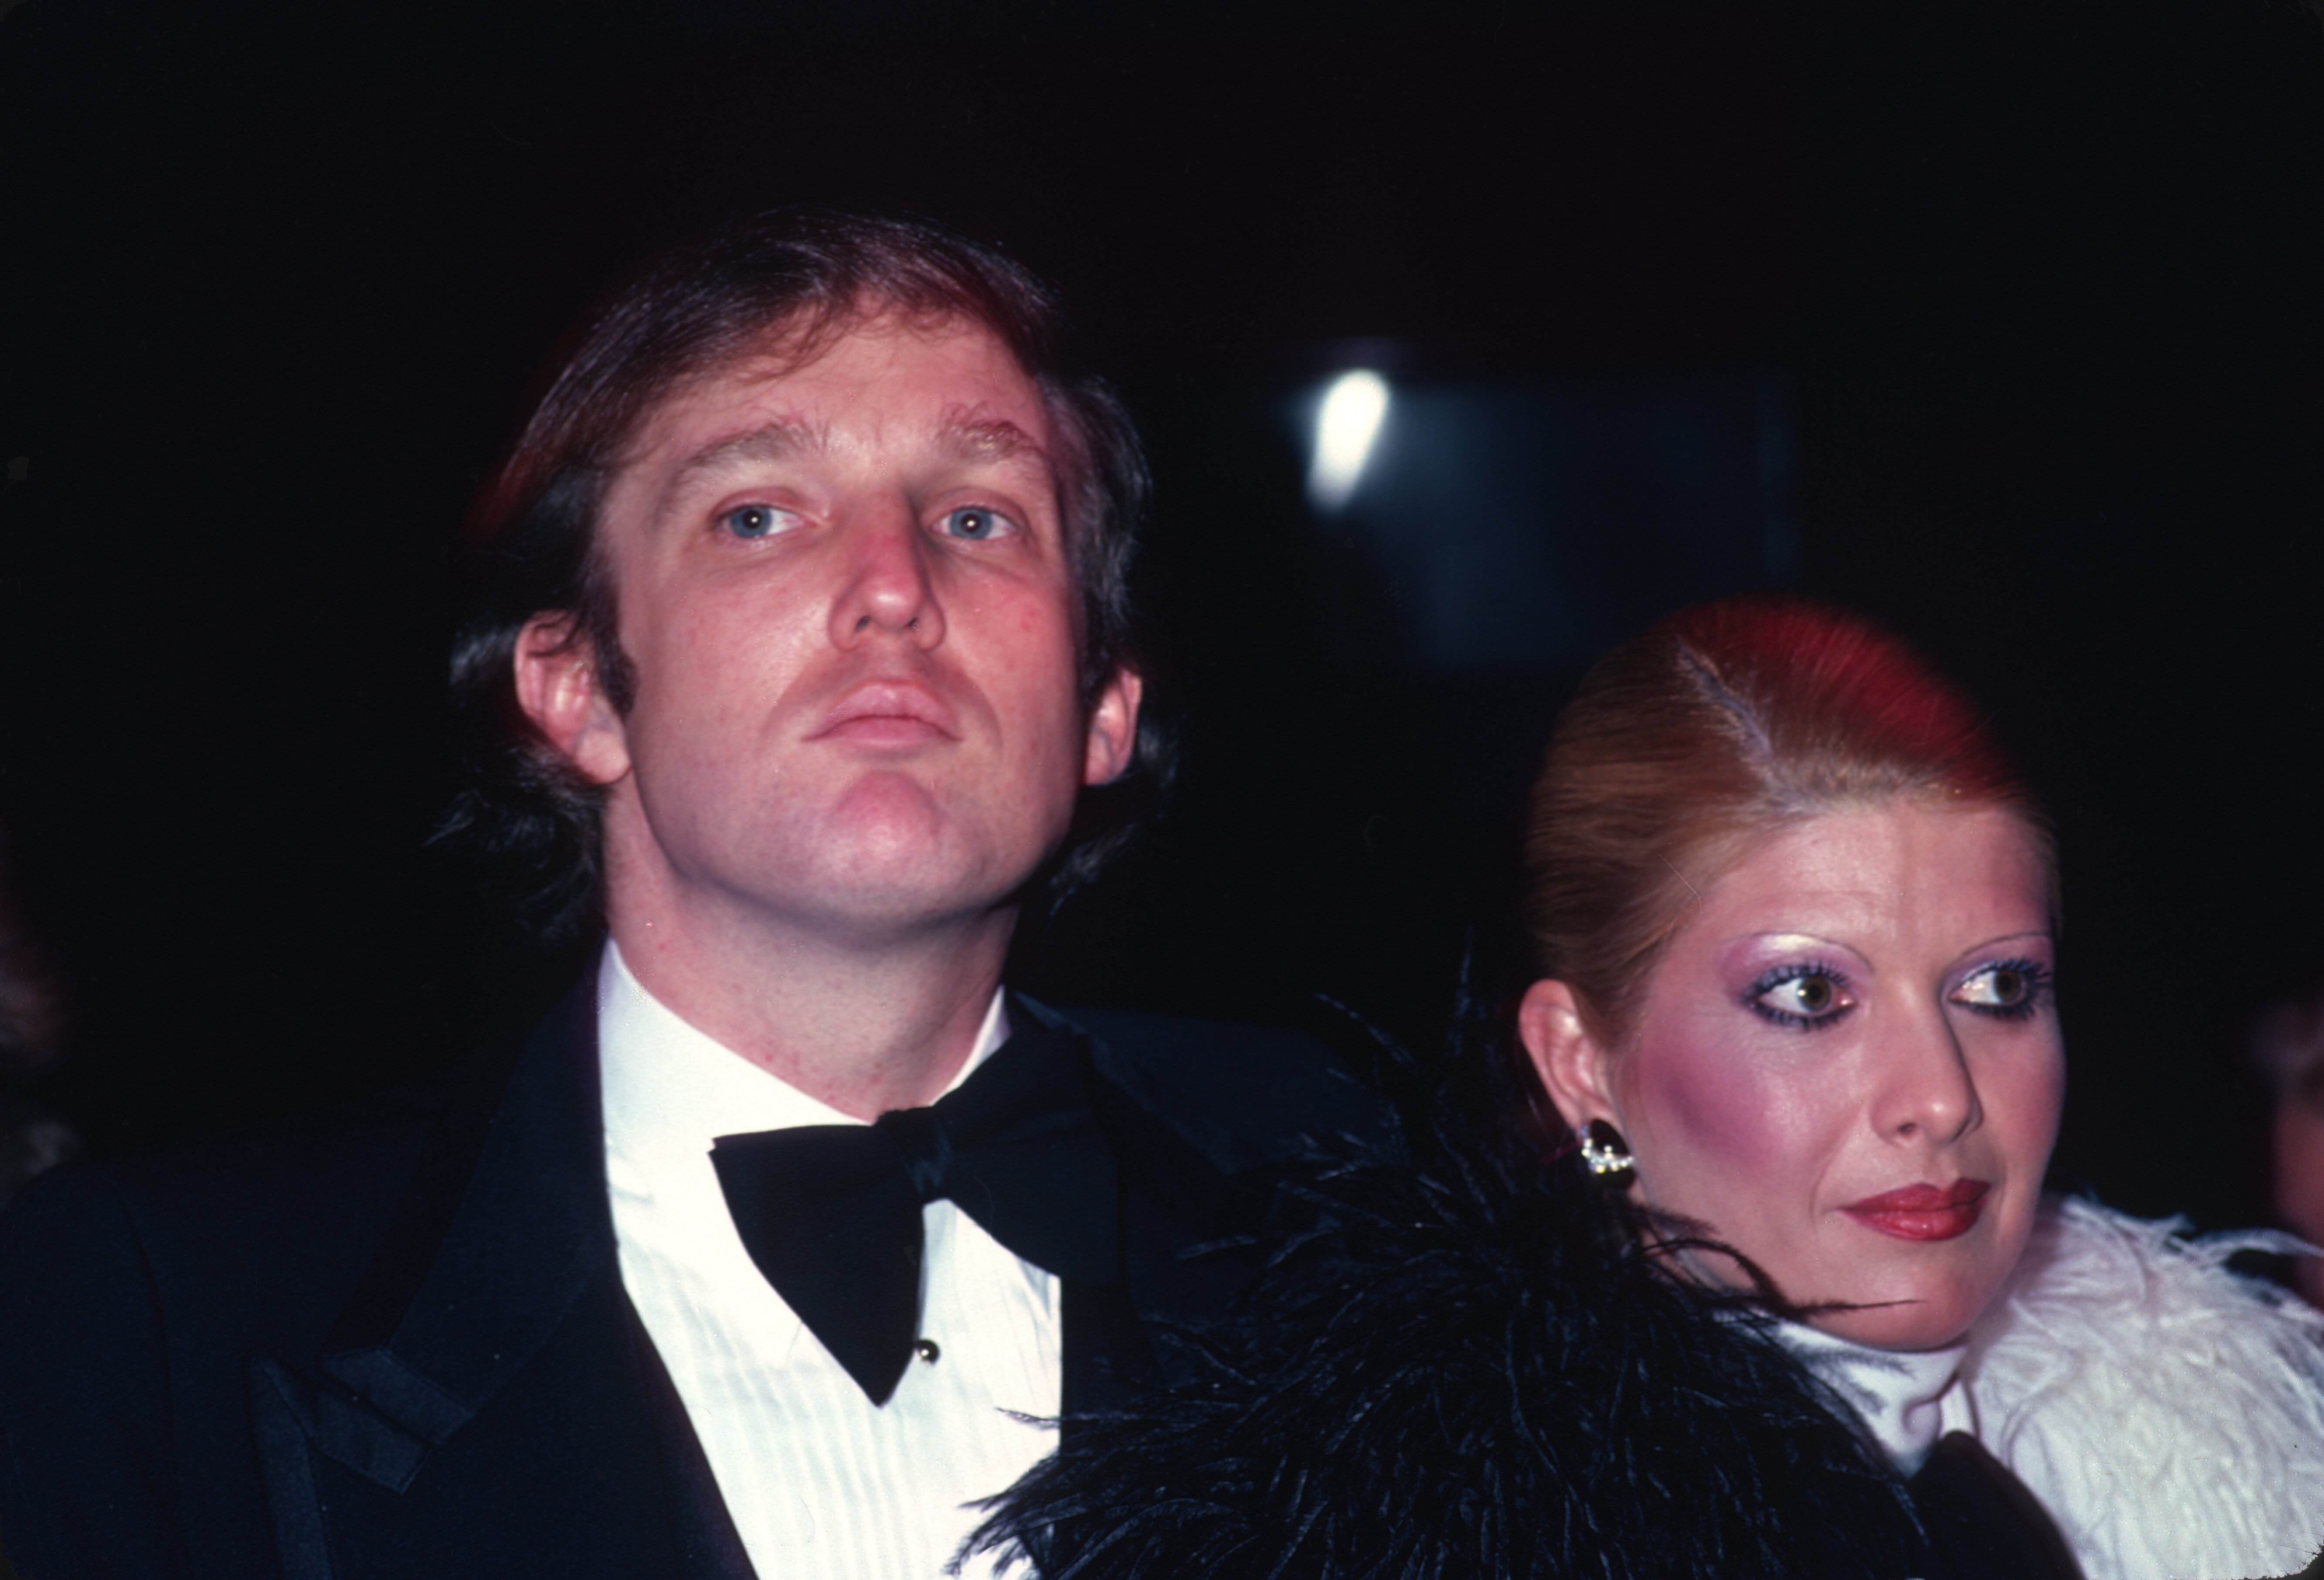 Donald Trump and Ivana Trump attend Roy Cohn's birthday party in February 1980 in New York City. | Source: Getty Images